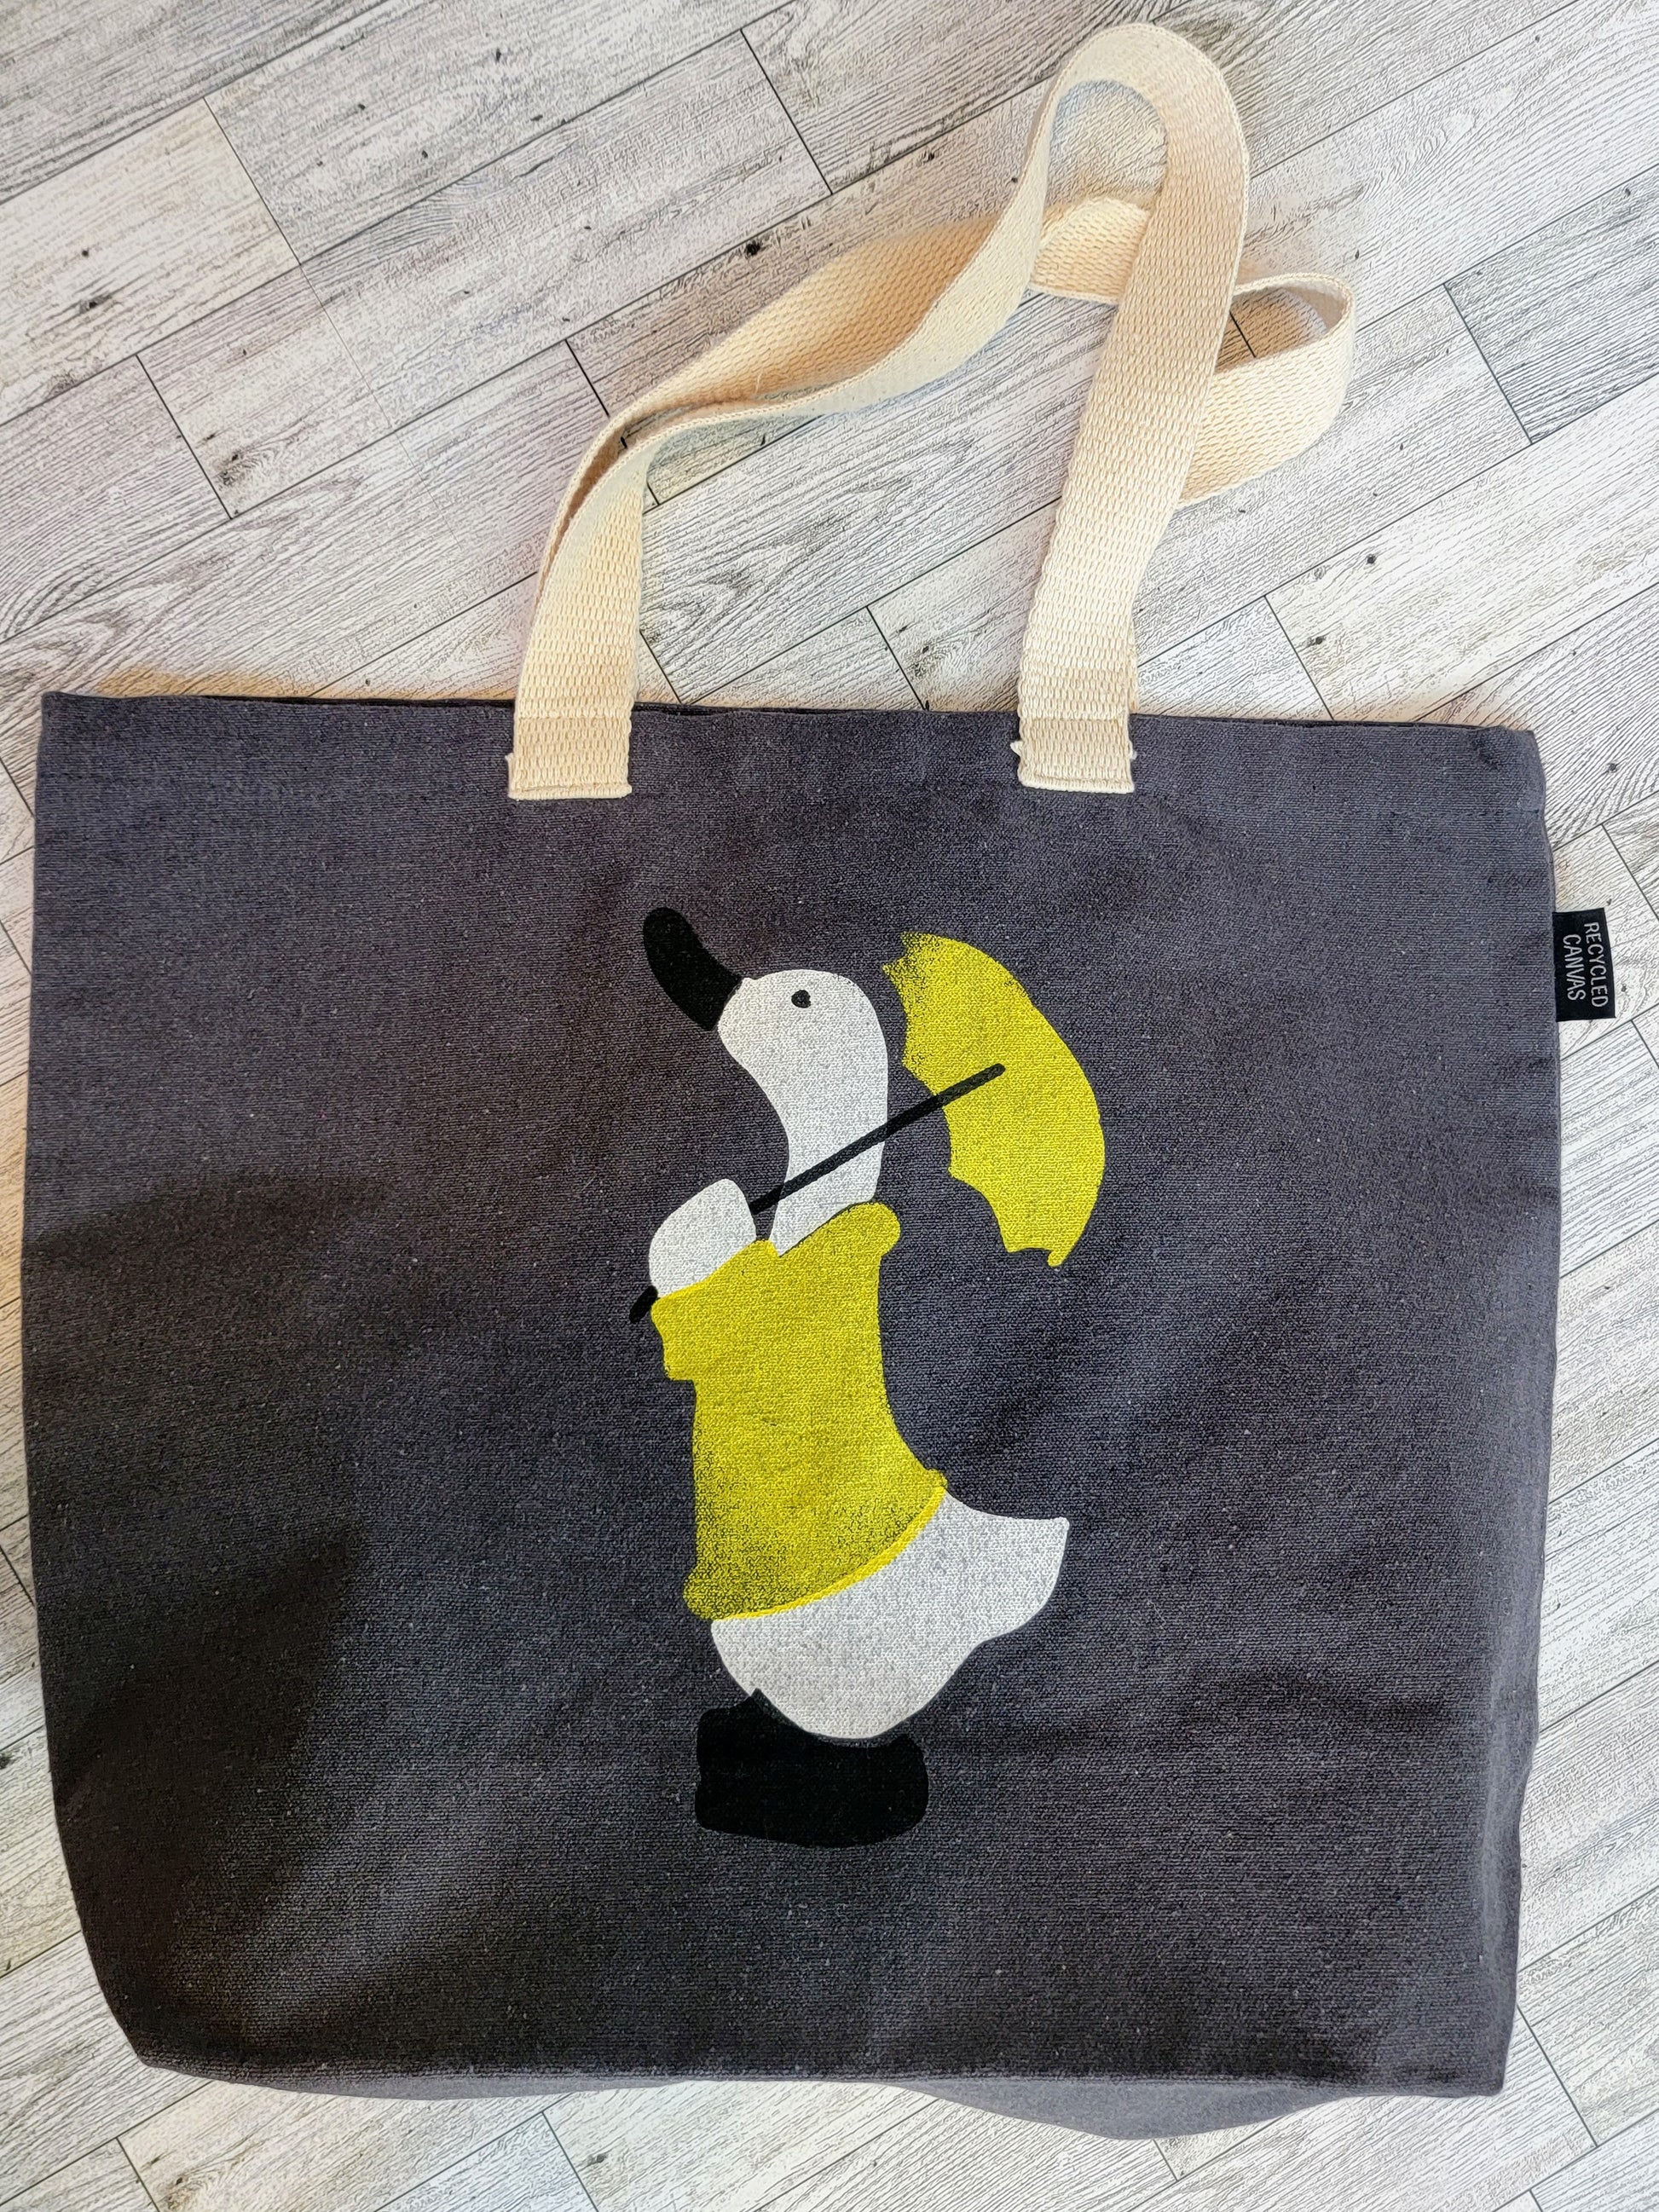 Duck in a Yellow Raincoat with matching Umbrella Dark Grey Recycled Canvas Tote Bag - Above Shot